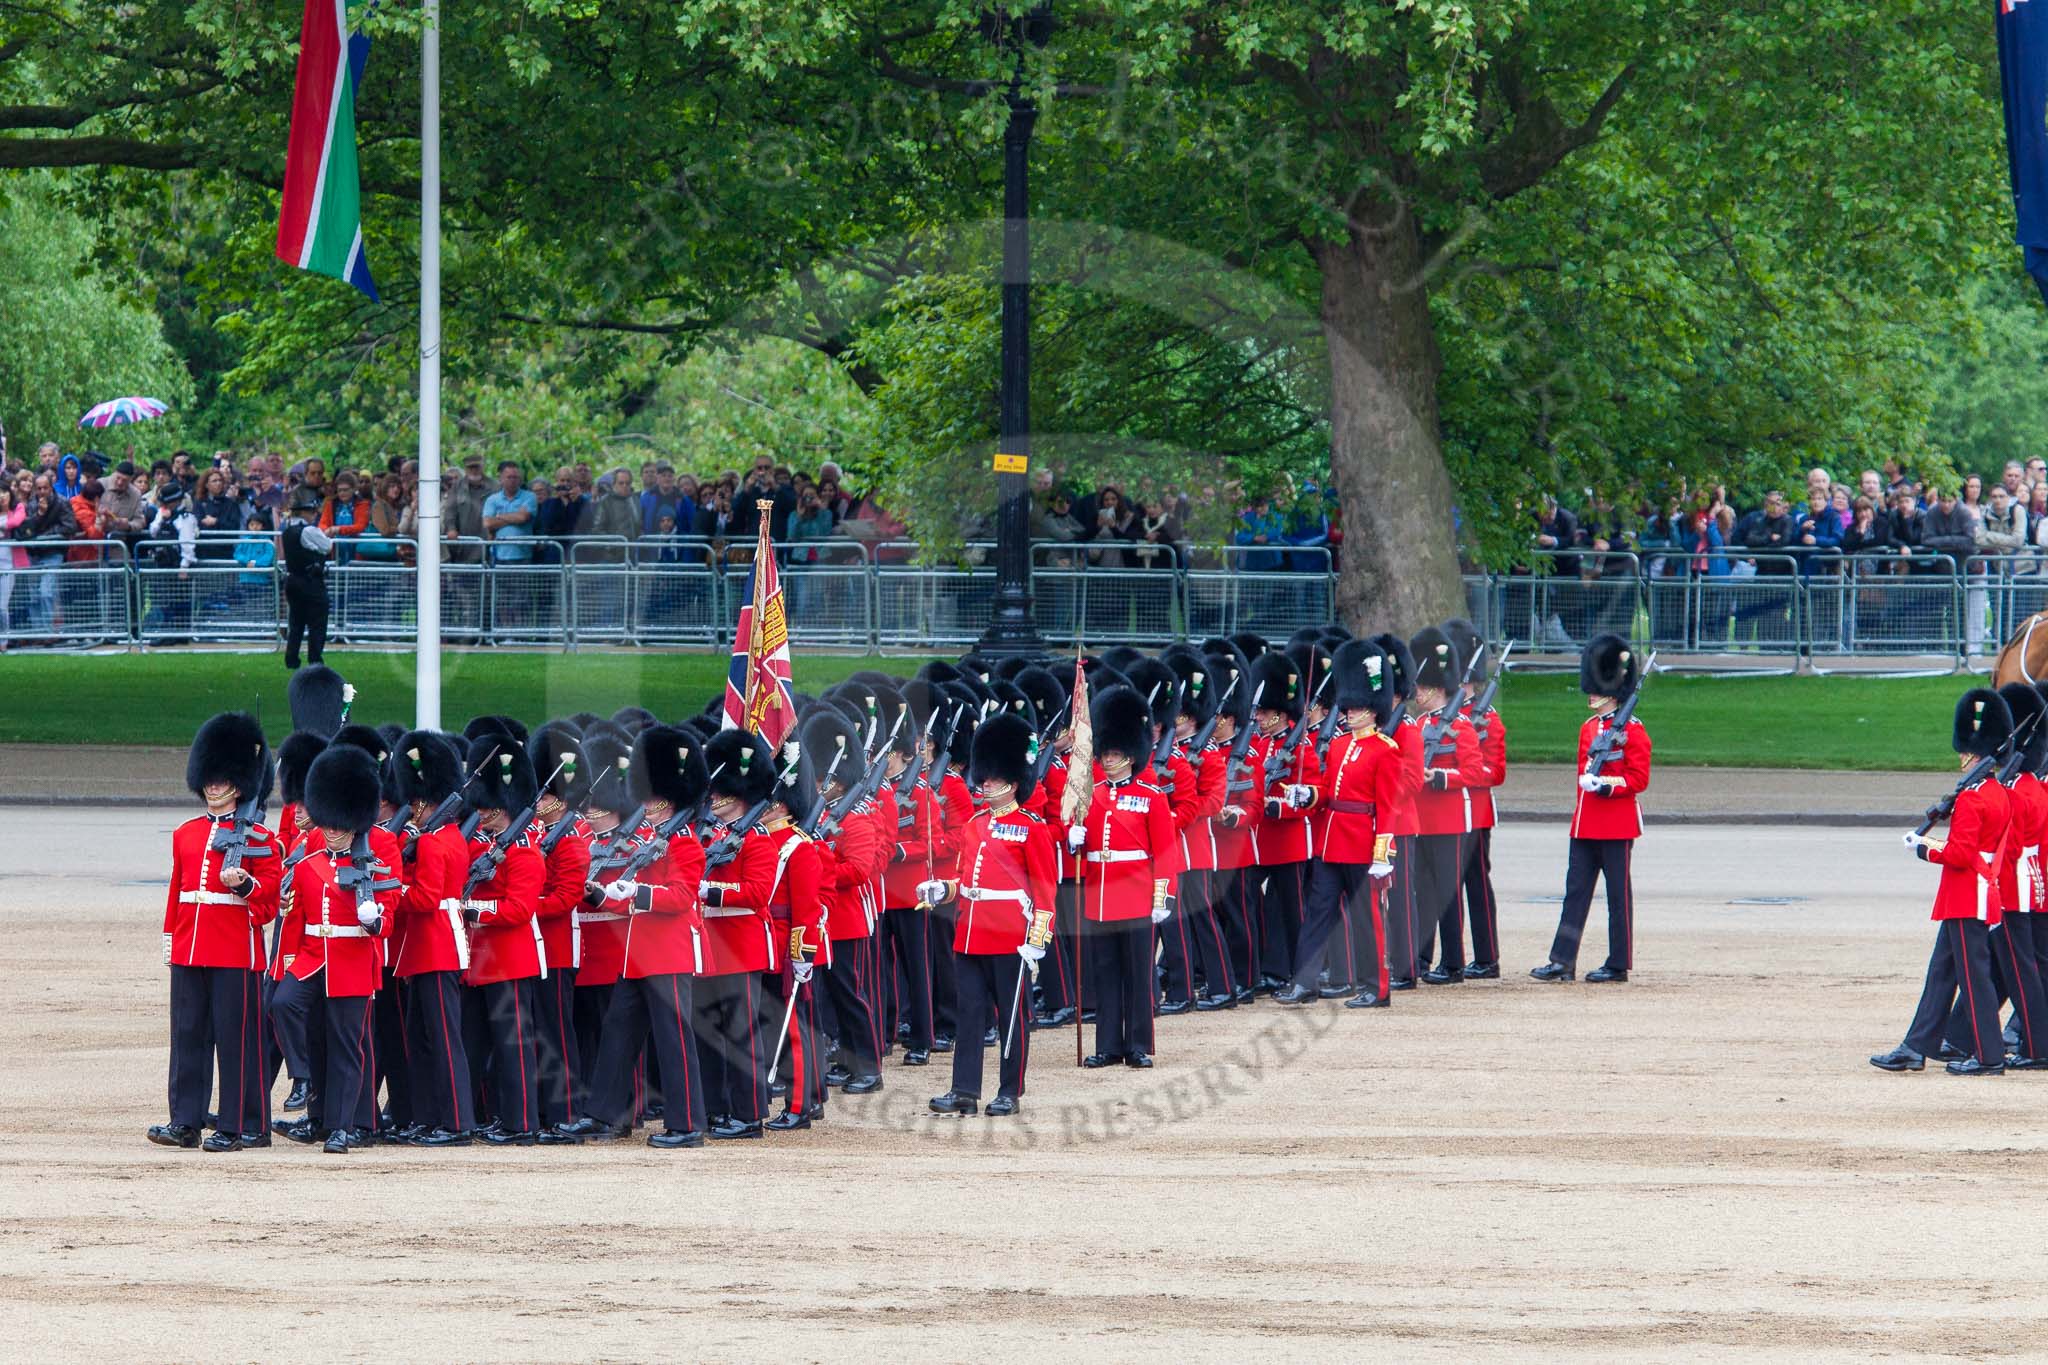 Major General's Review 2013: The March Past in Slow Time - Field Officer and Major of the Parade leading the six guards around Horse Guards Parade..
Horse Guards Parade, Westminster,
London SW1,

United Kingdom,
on 01 June 2013 at 11:30, image #461